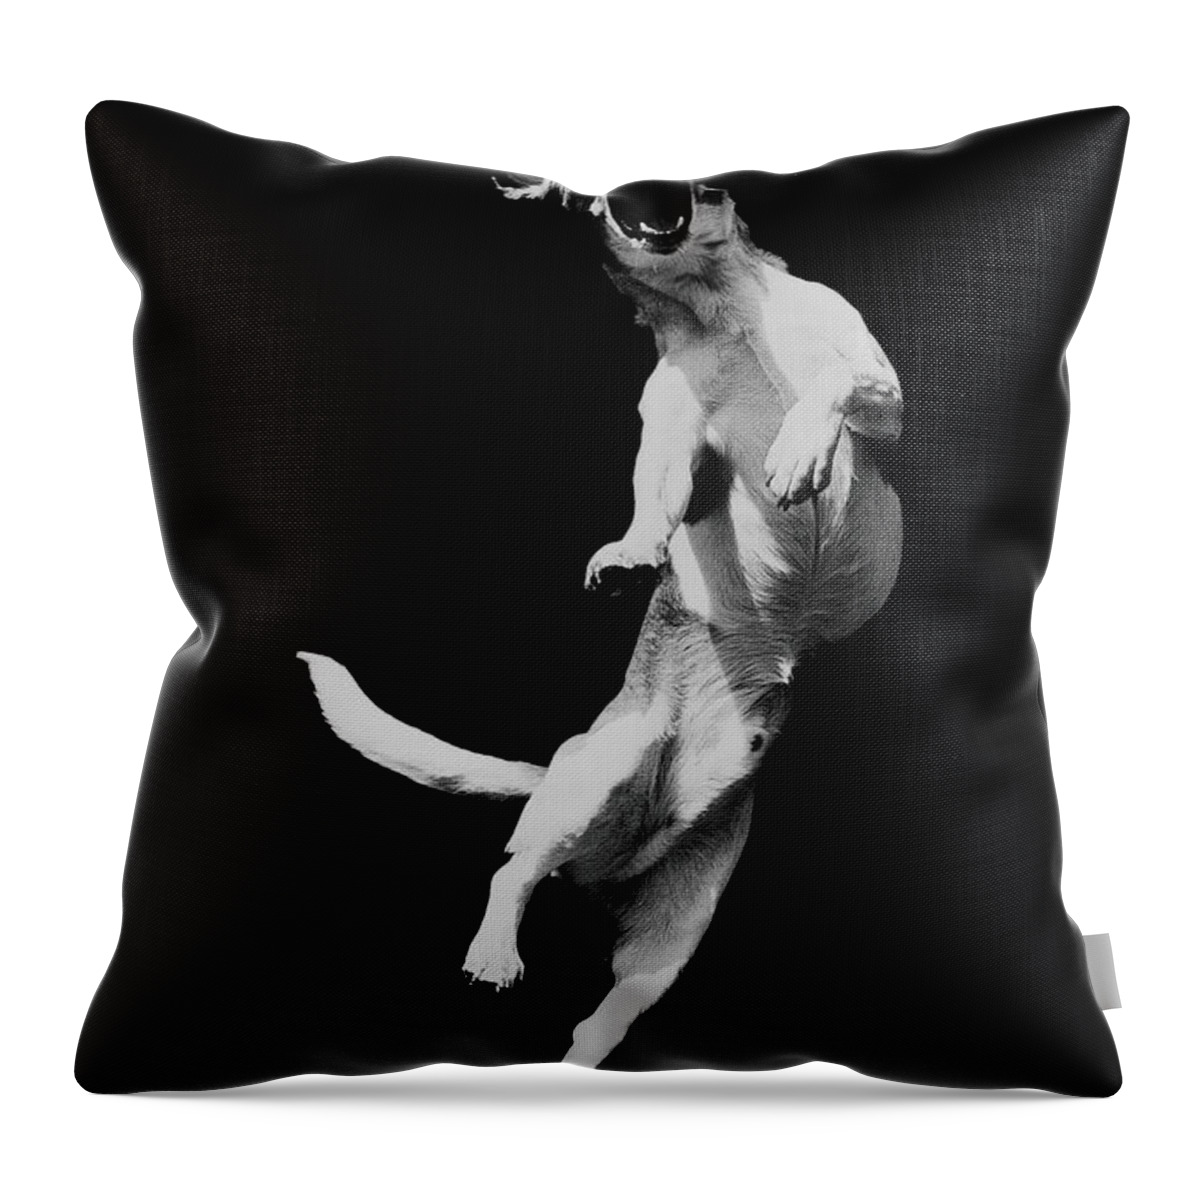 Pets Throw Pillow featuring the photograph Dog In Mid-air Jump B&w by Henry Horenstein